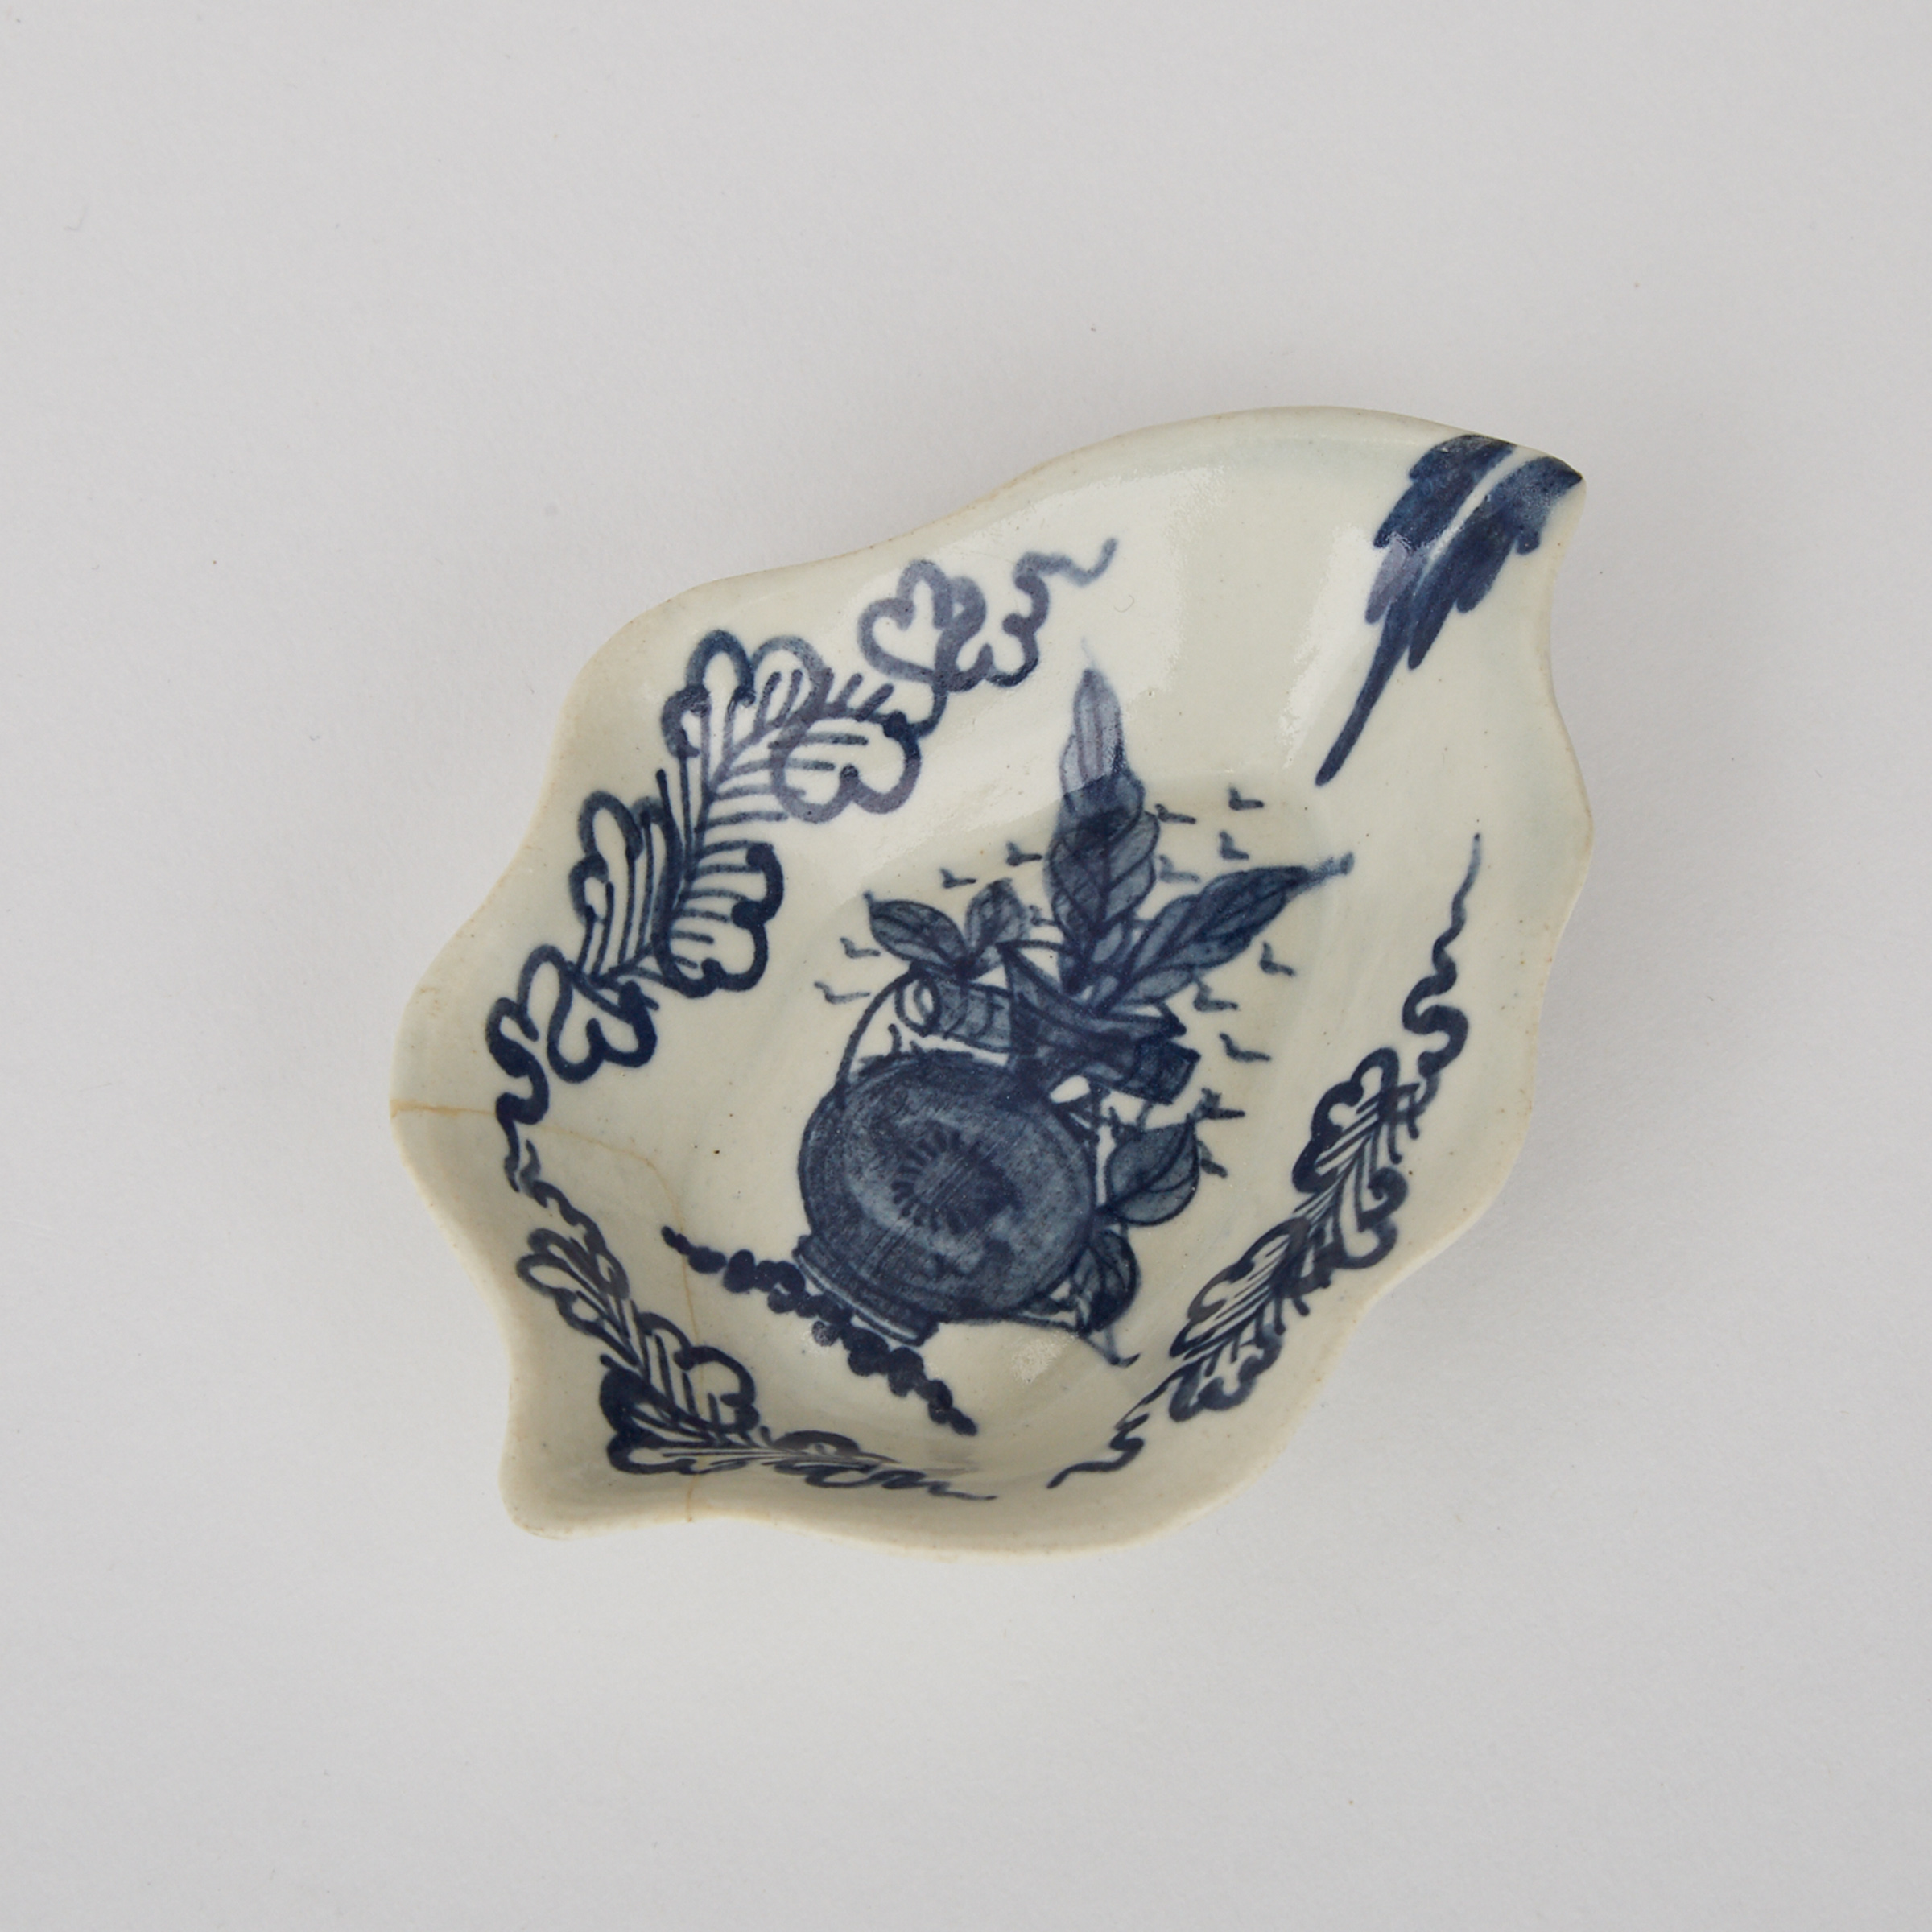 Limehouse Blue Painted Leaf-Shaped Pickle Dish, c.1747-48